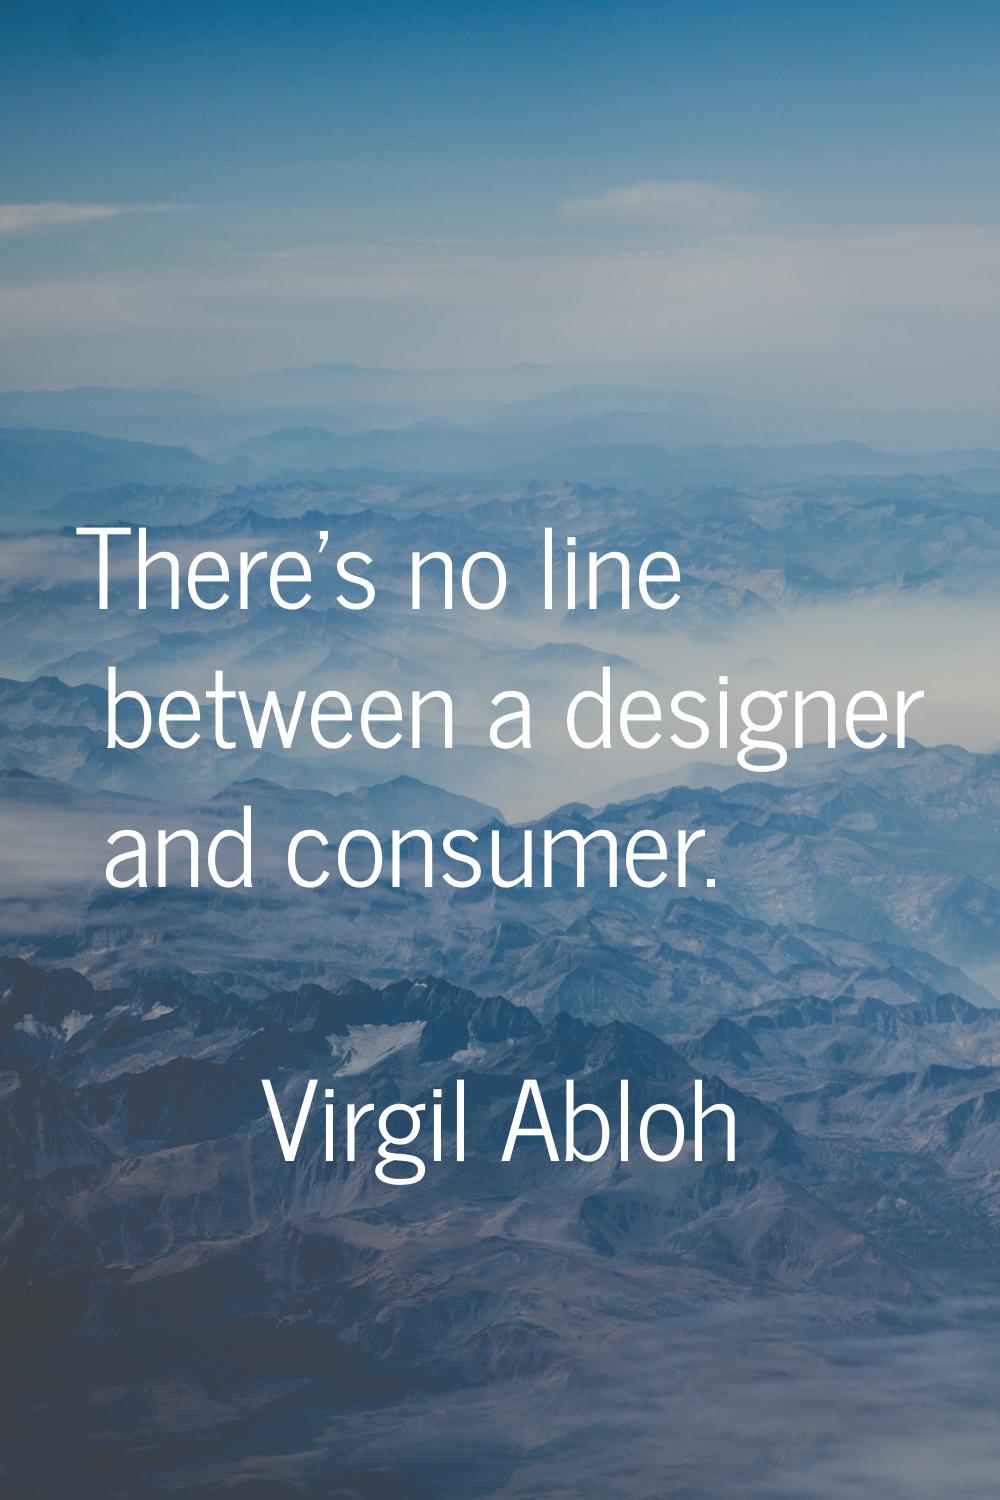 There's no line between a designer and consumer.